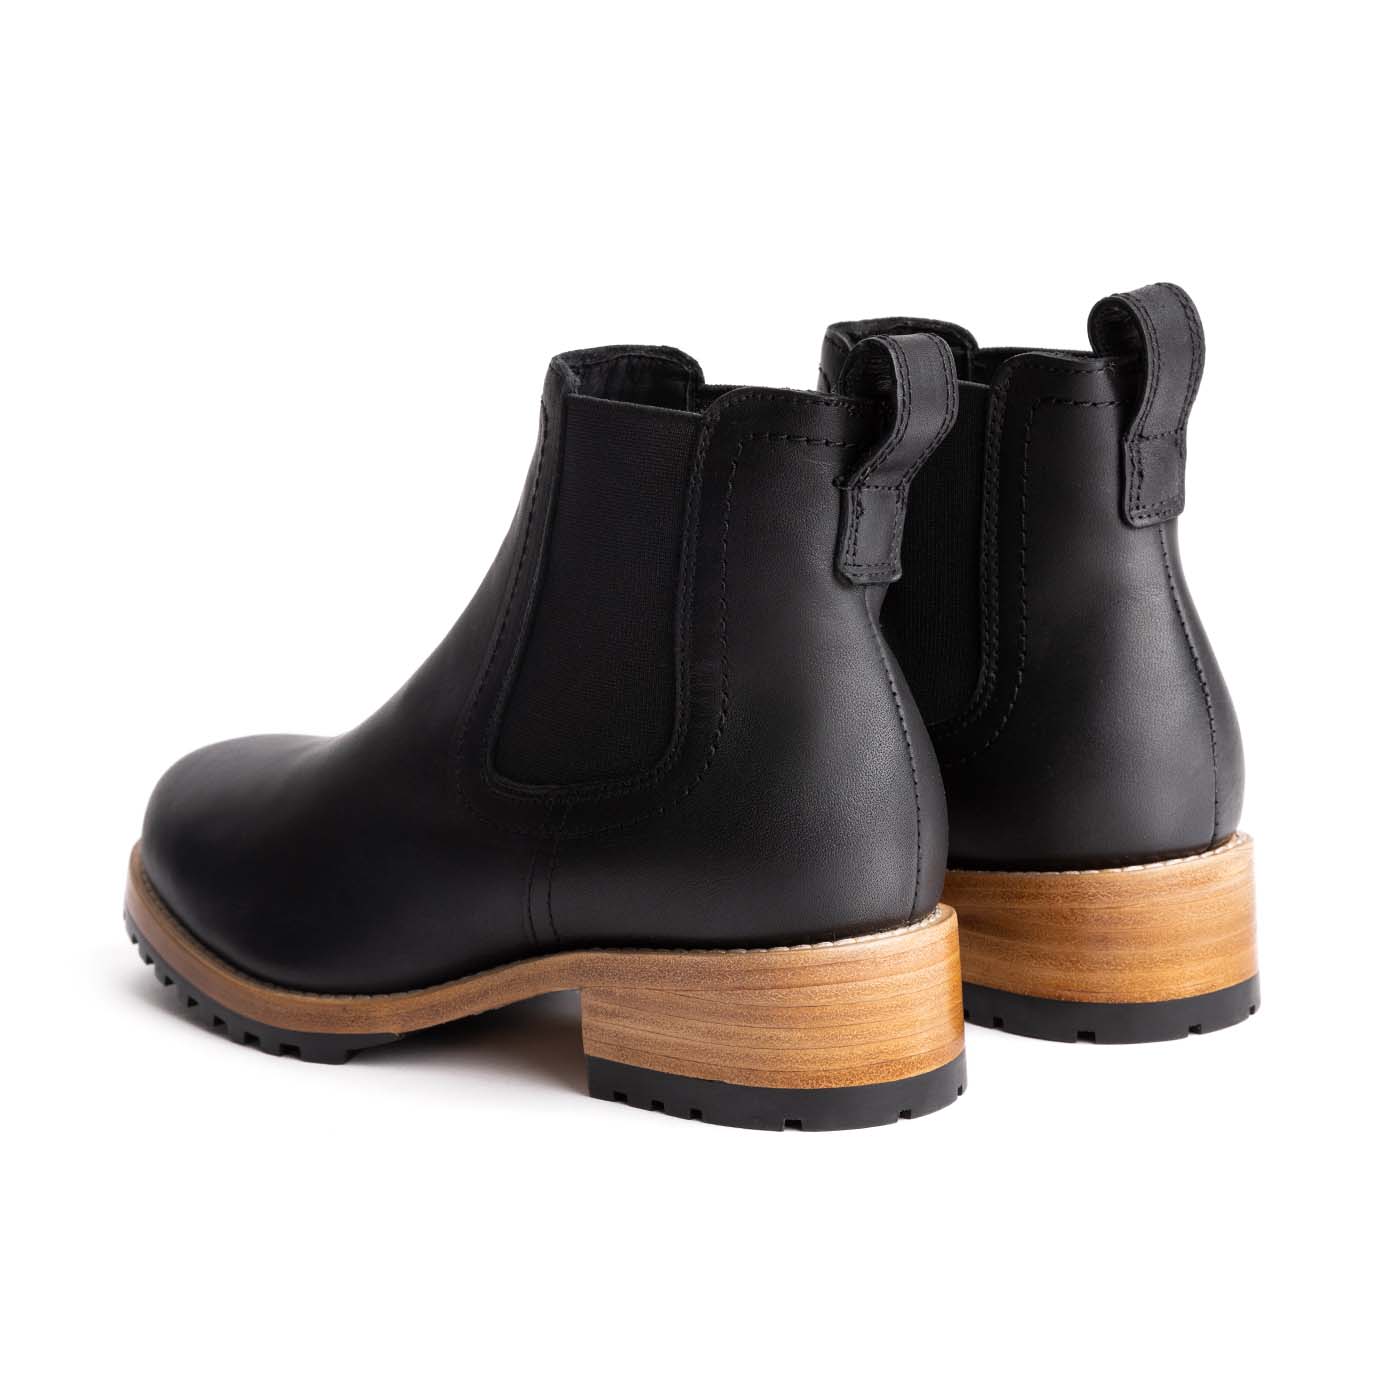 All-Weather Chelsea Boot Black